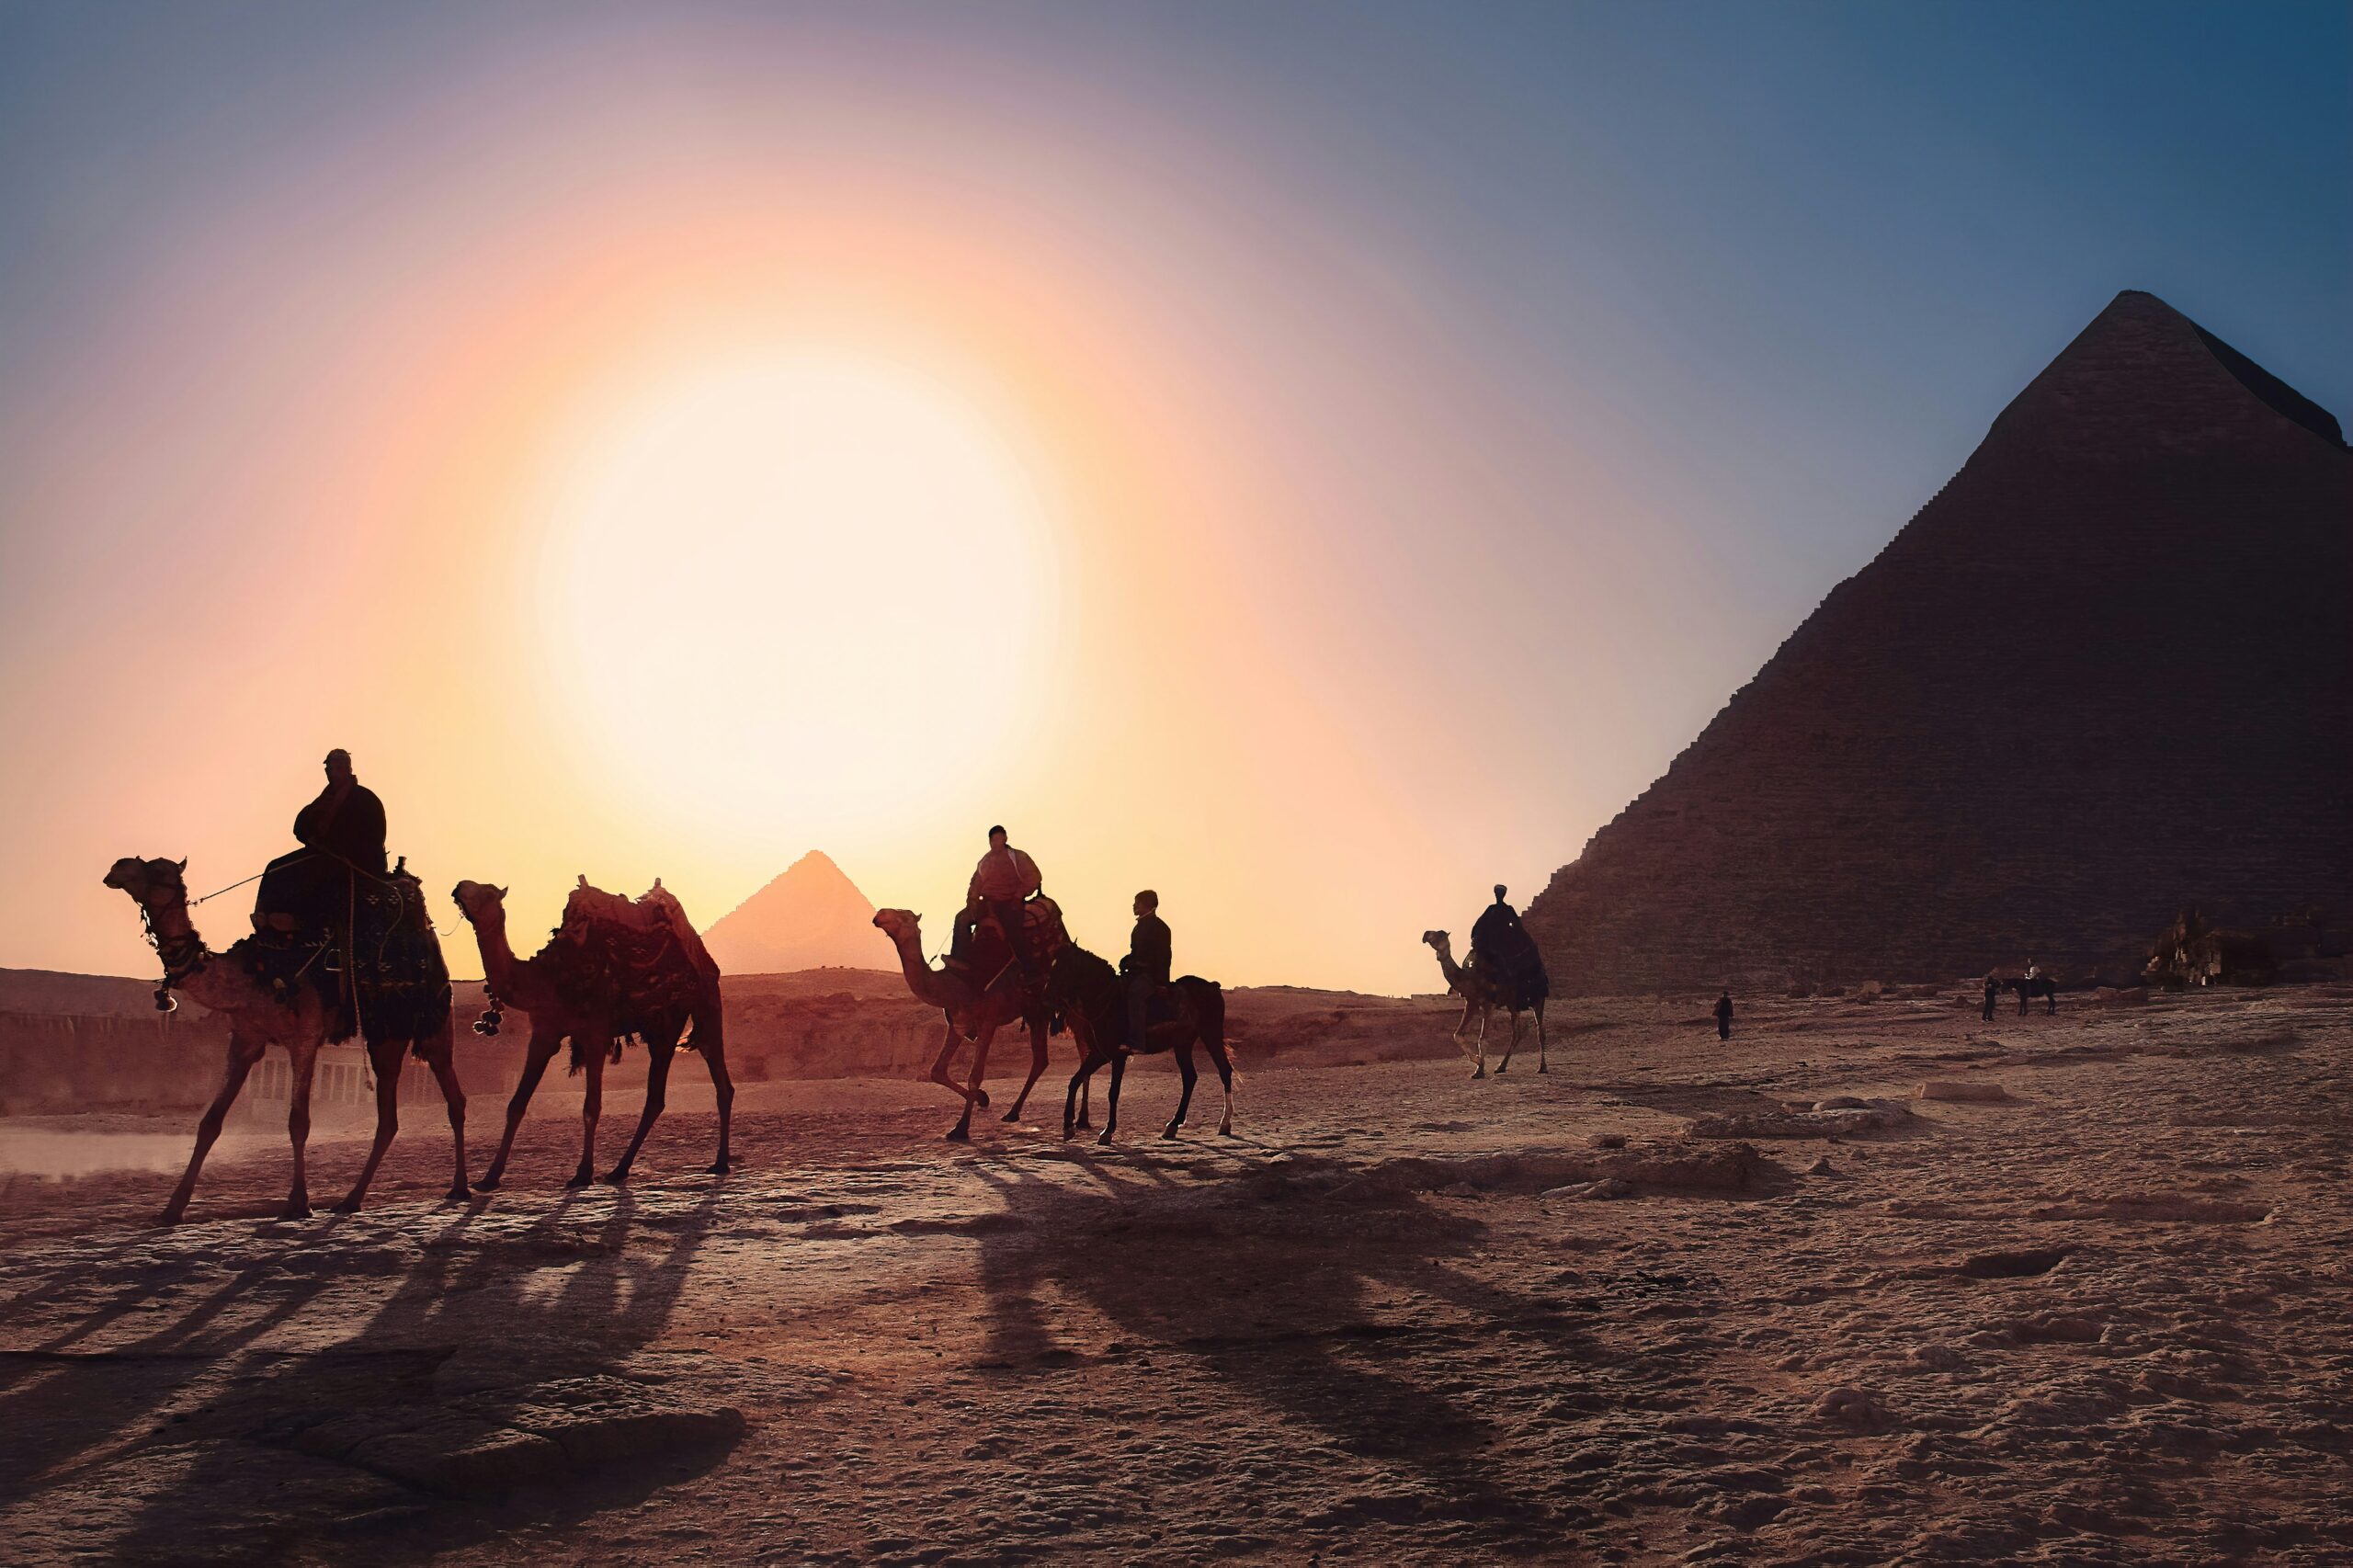 A safari in the desert is an exciting activities for travelers visiting Egypt. 
Pictured: Egypt 